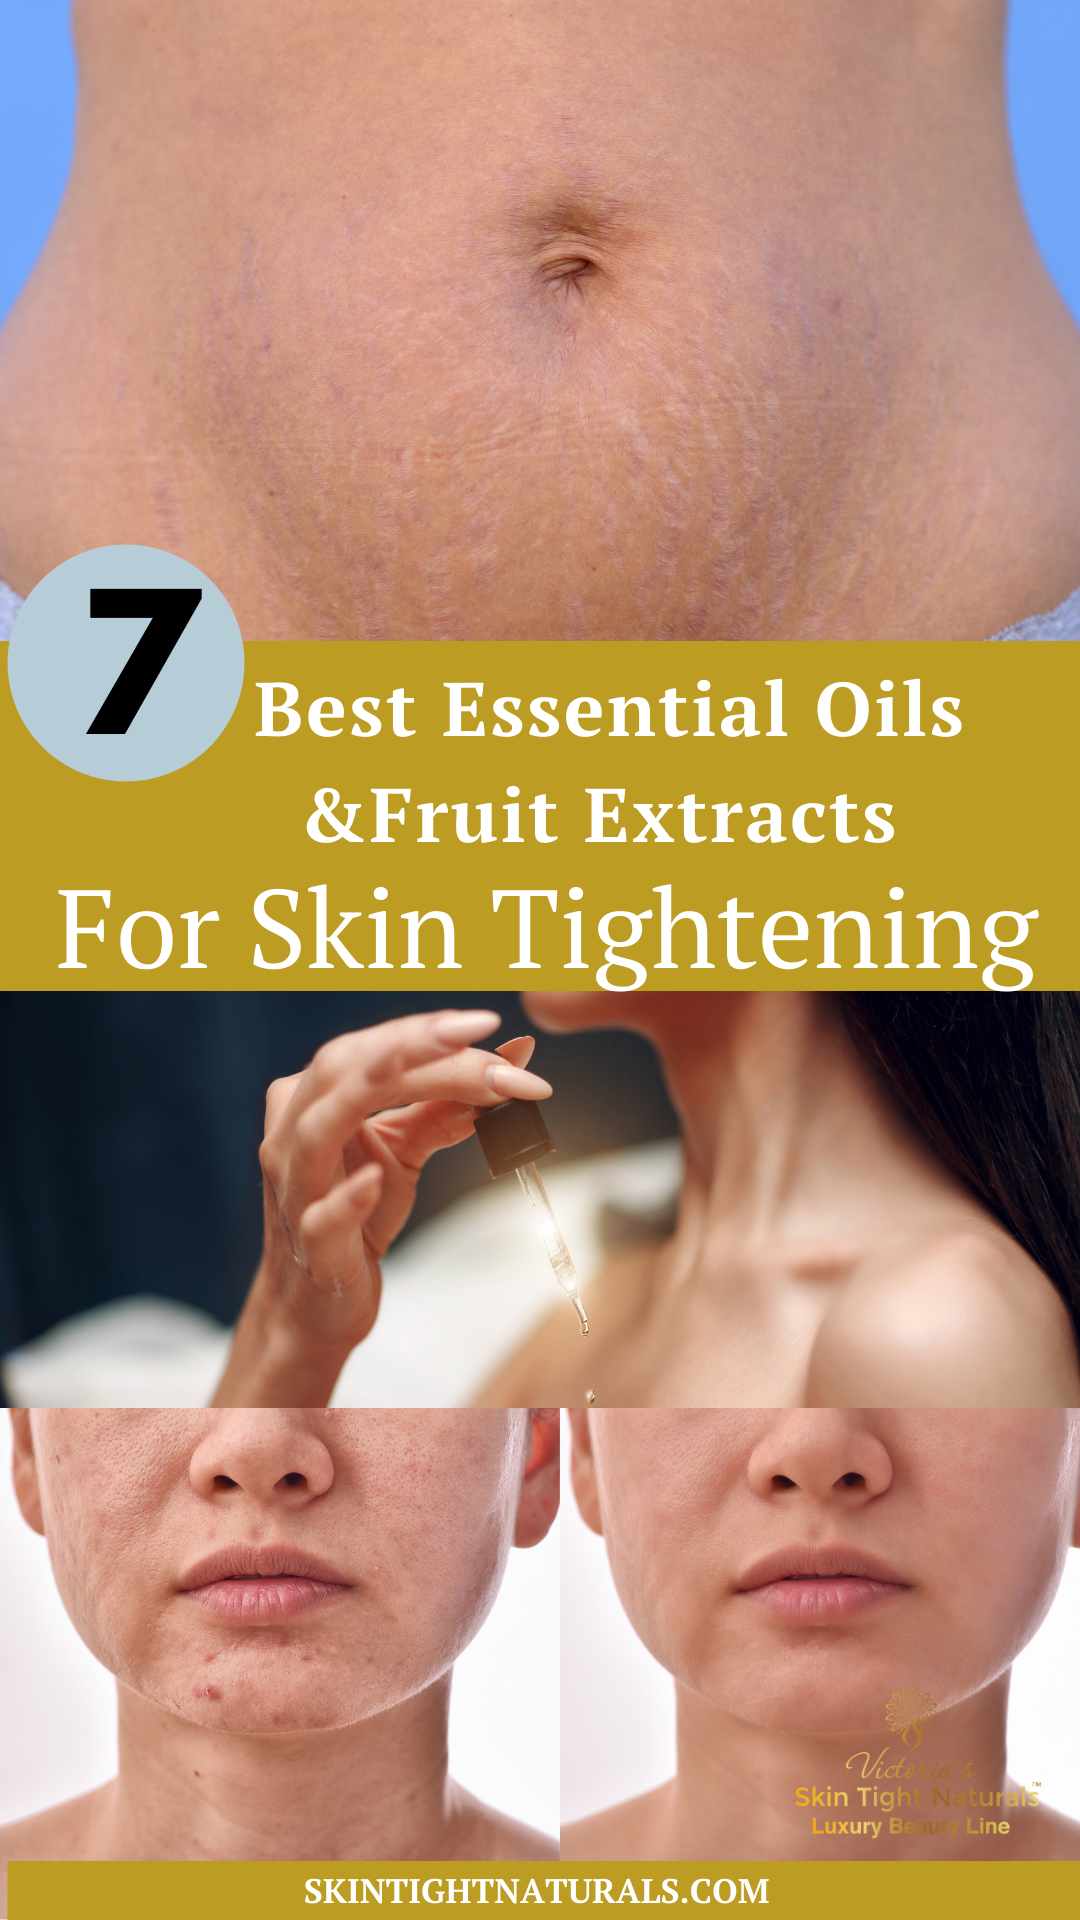 How To Tighten Sagging Skin With Essential Oils